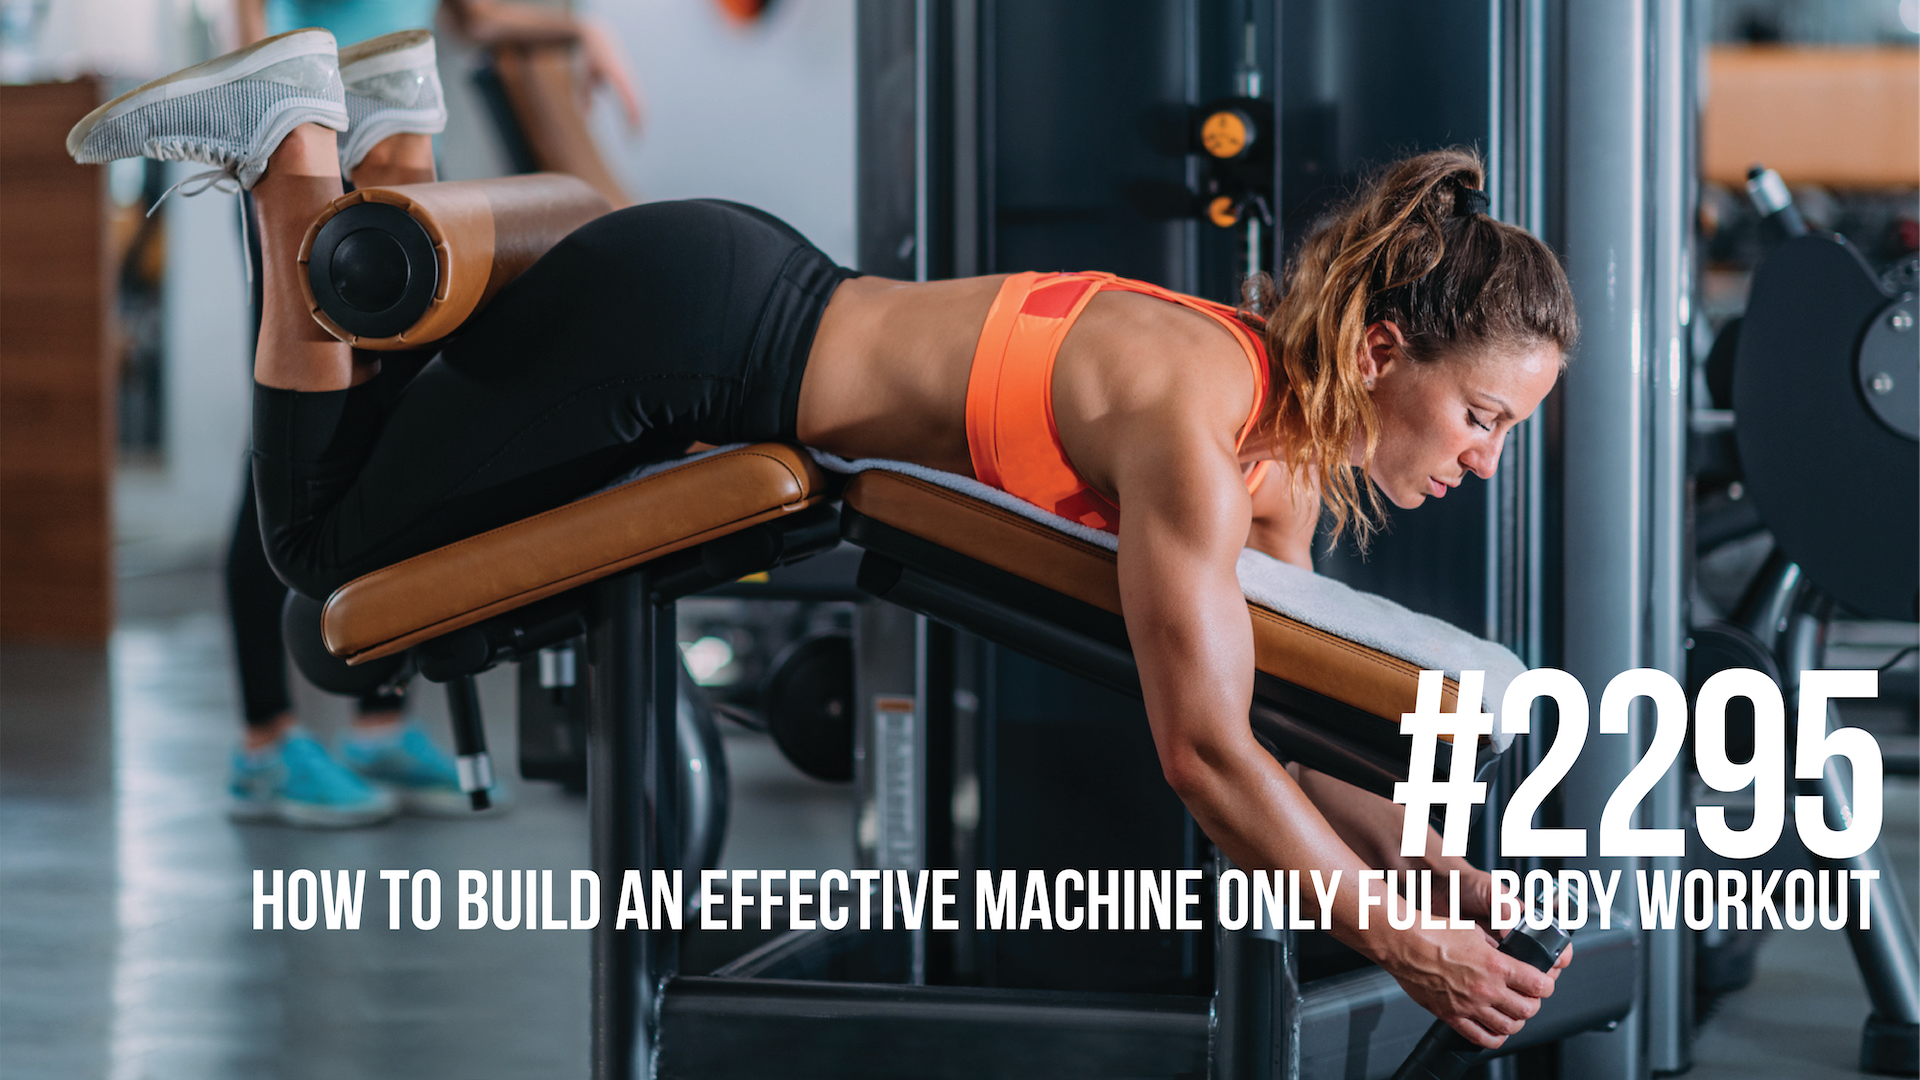 2295: How to Build an Effective Machine Only Full Body Workout